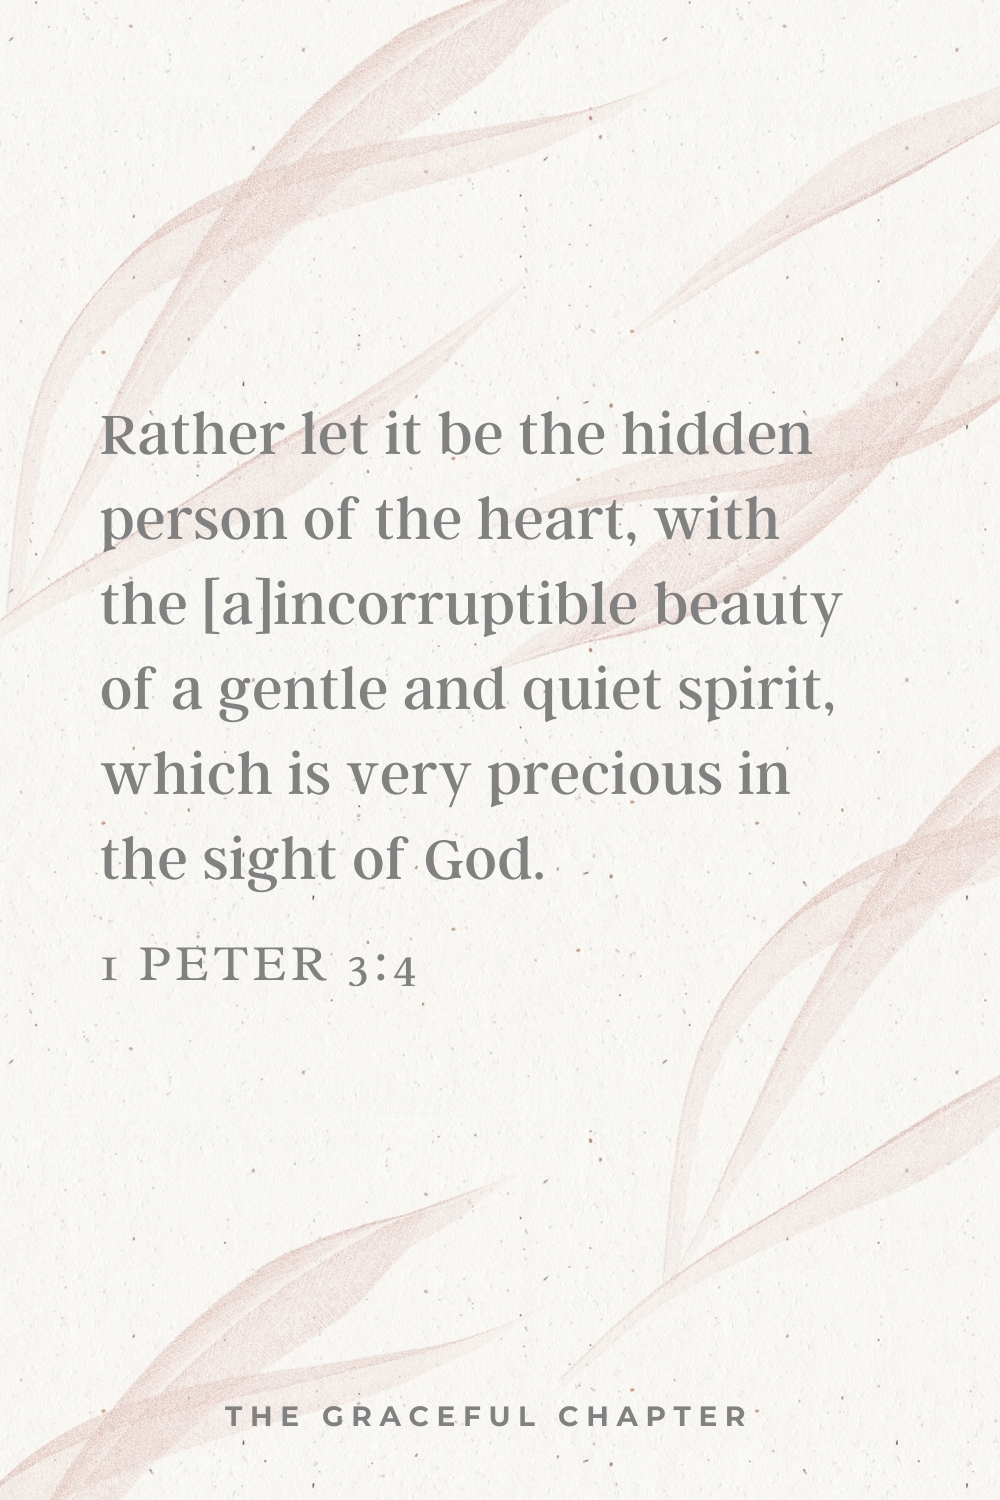 Rather let it be the hidden person of the heart, with the incorruptible beauty of a gentle and quiet spirit, which is very precious in the sight of God. 1 Peter 3:4